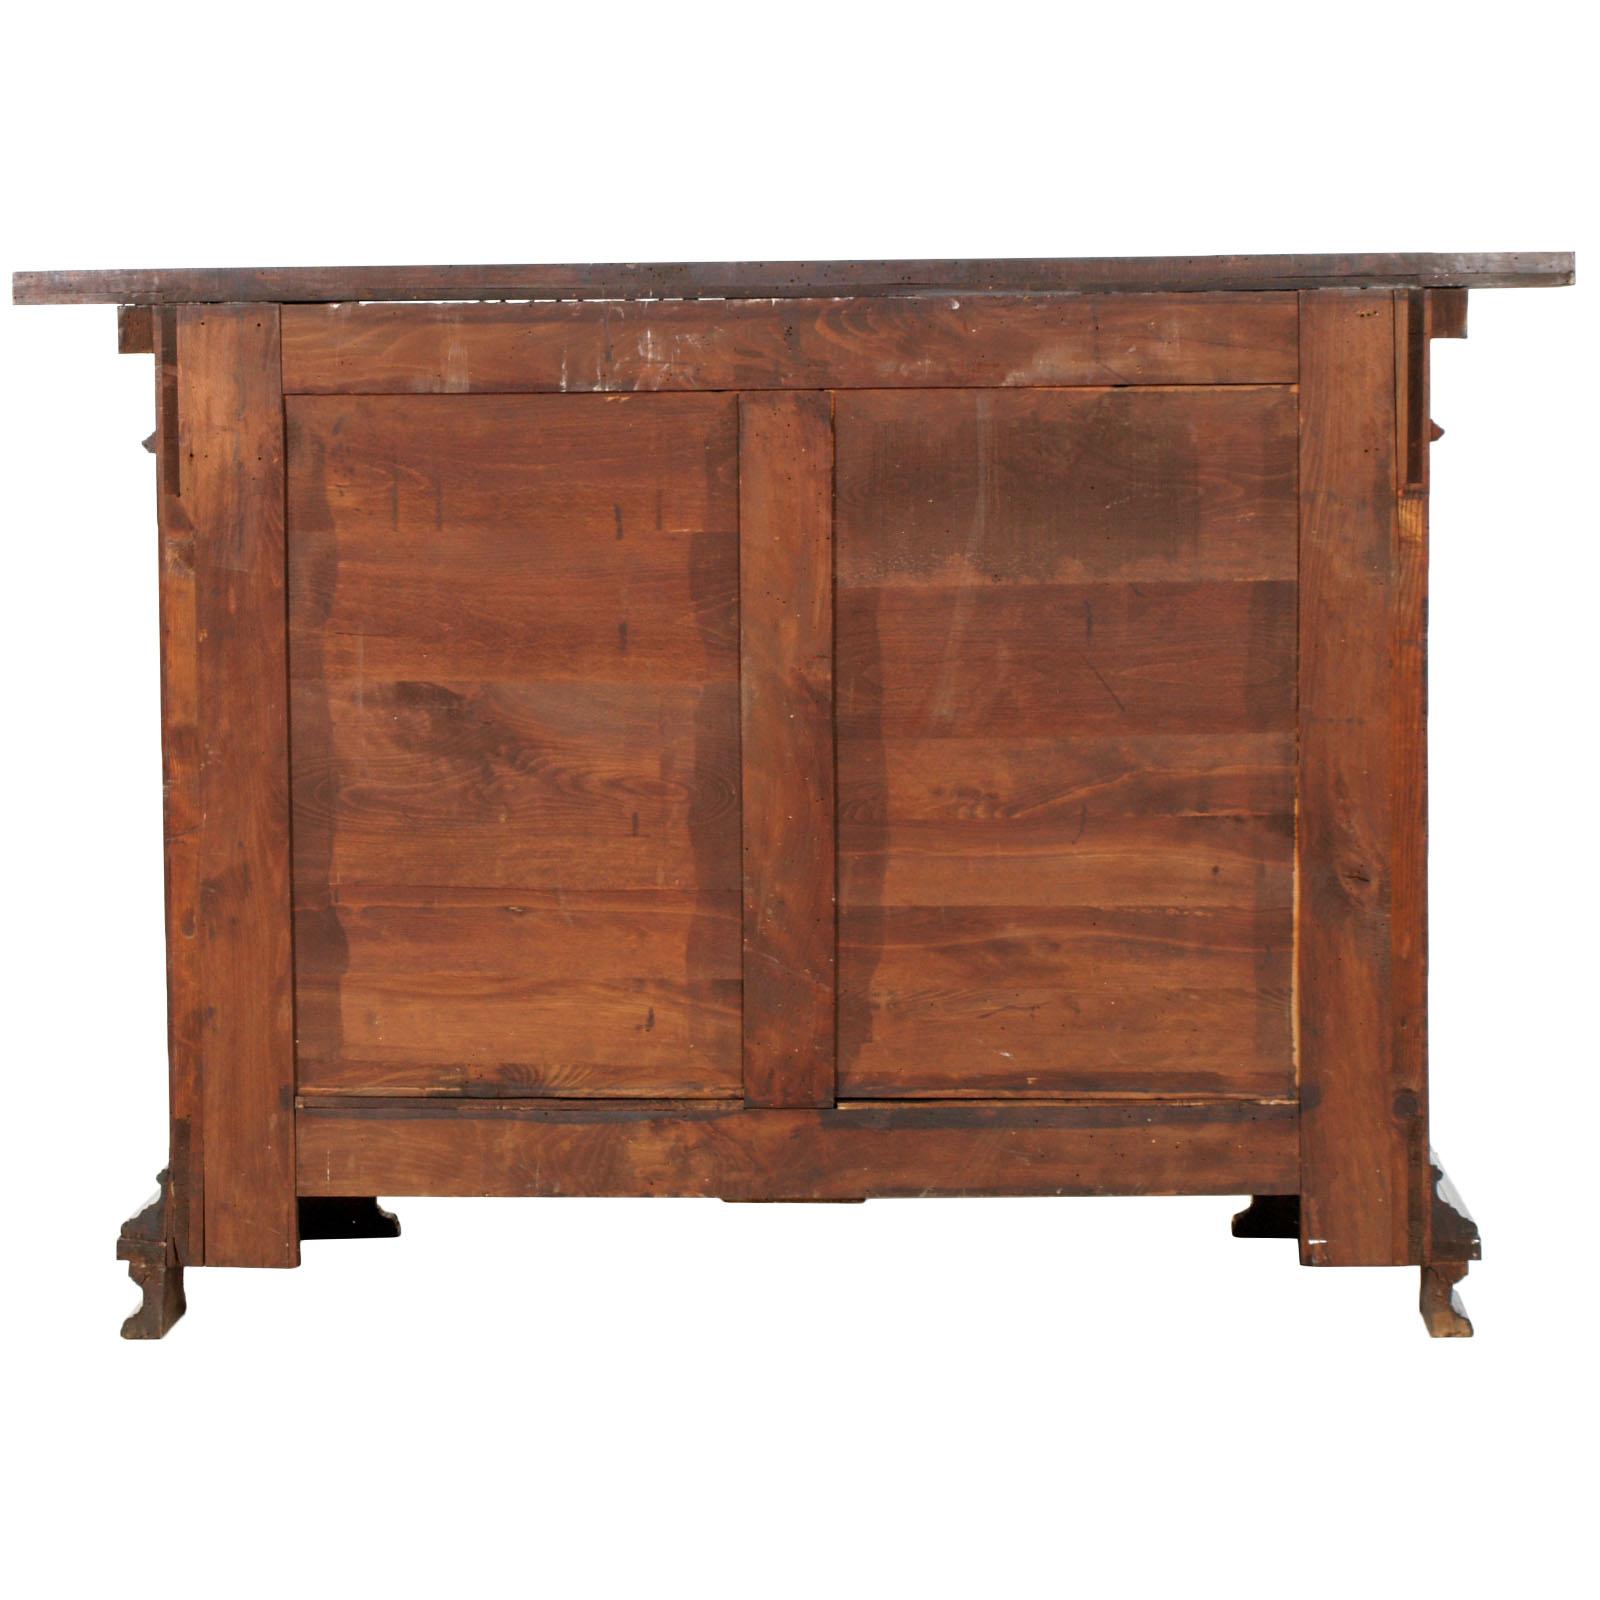 20th Century Tuscany Renaissance Credenza Sideboard by Dini & Puccini, 1928, in Solid Walnut For Sale